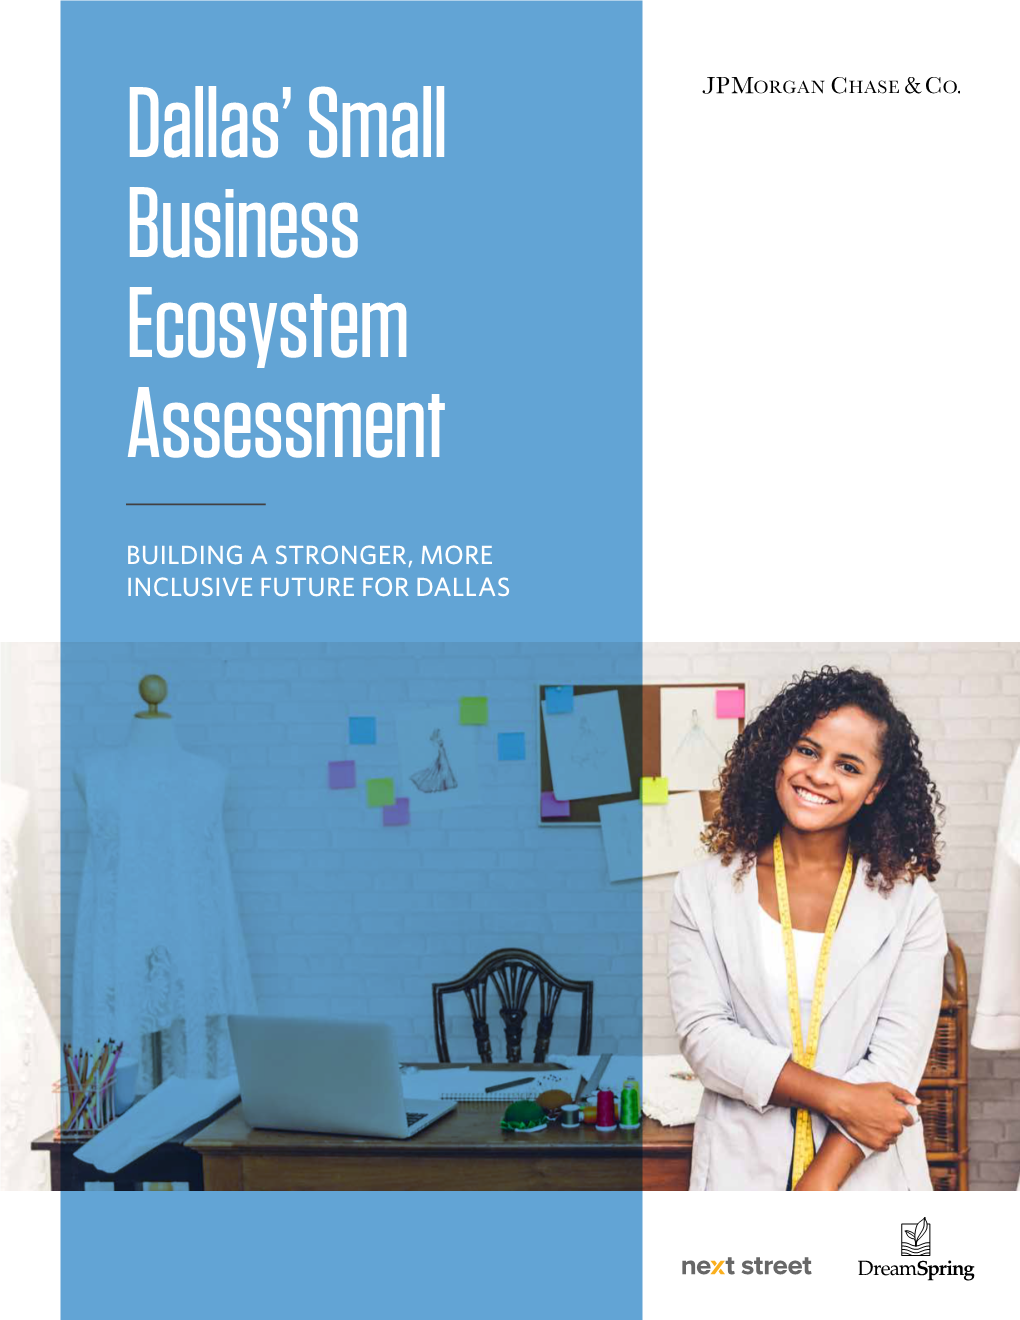 Dallas' Small Business Ecosystem Assessment